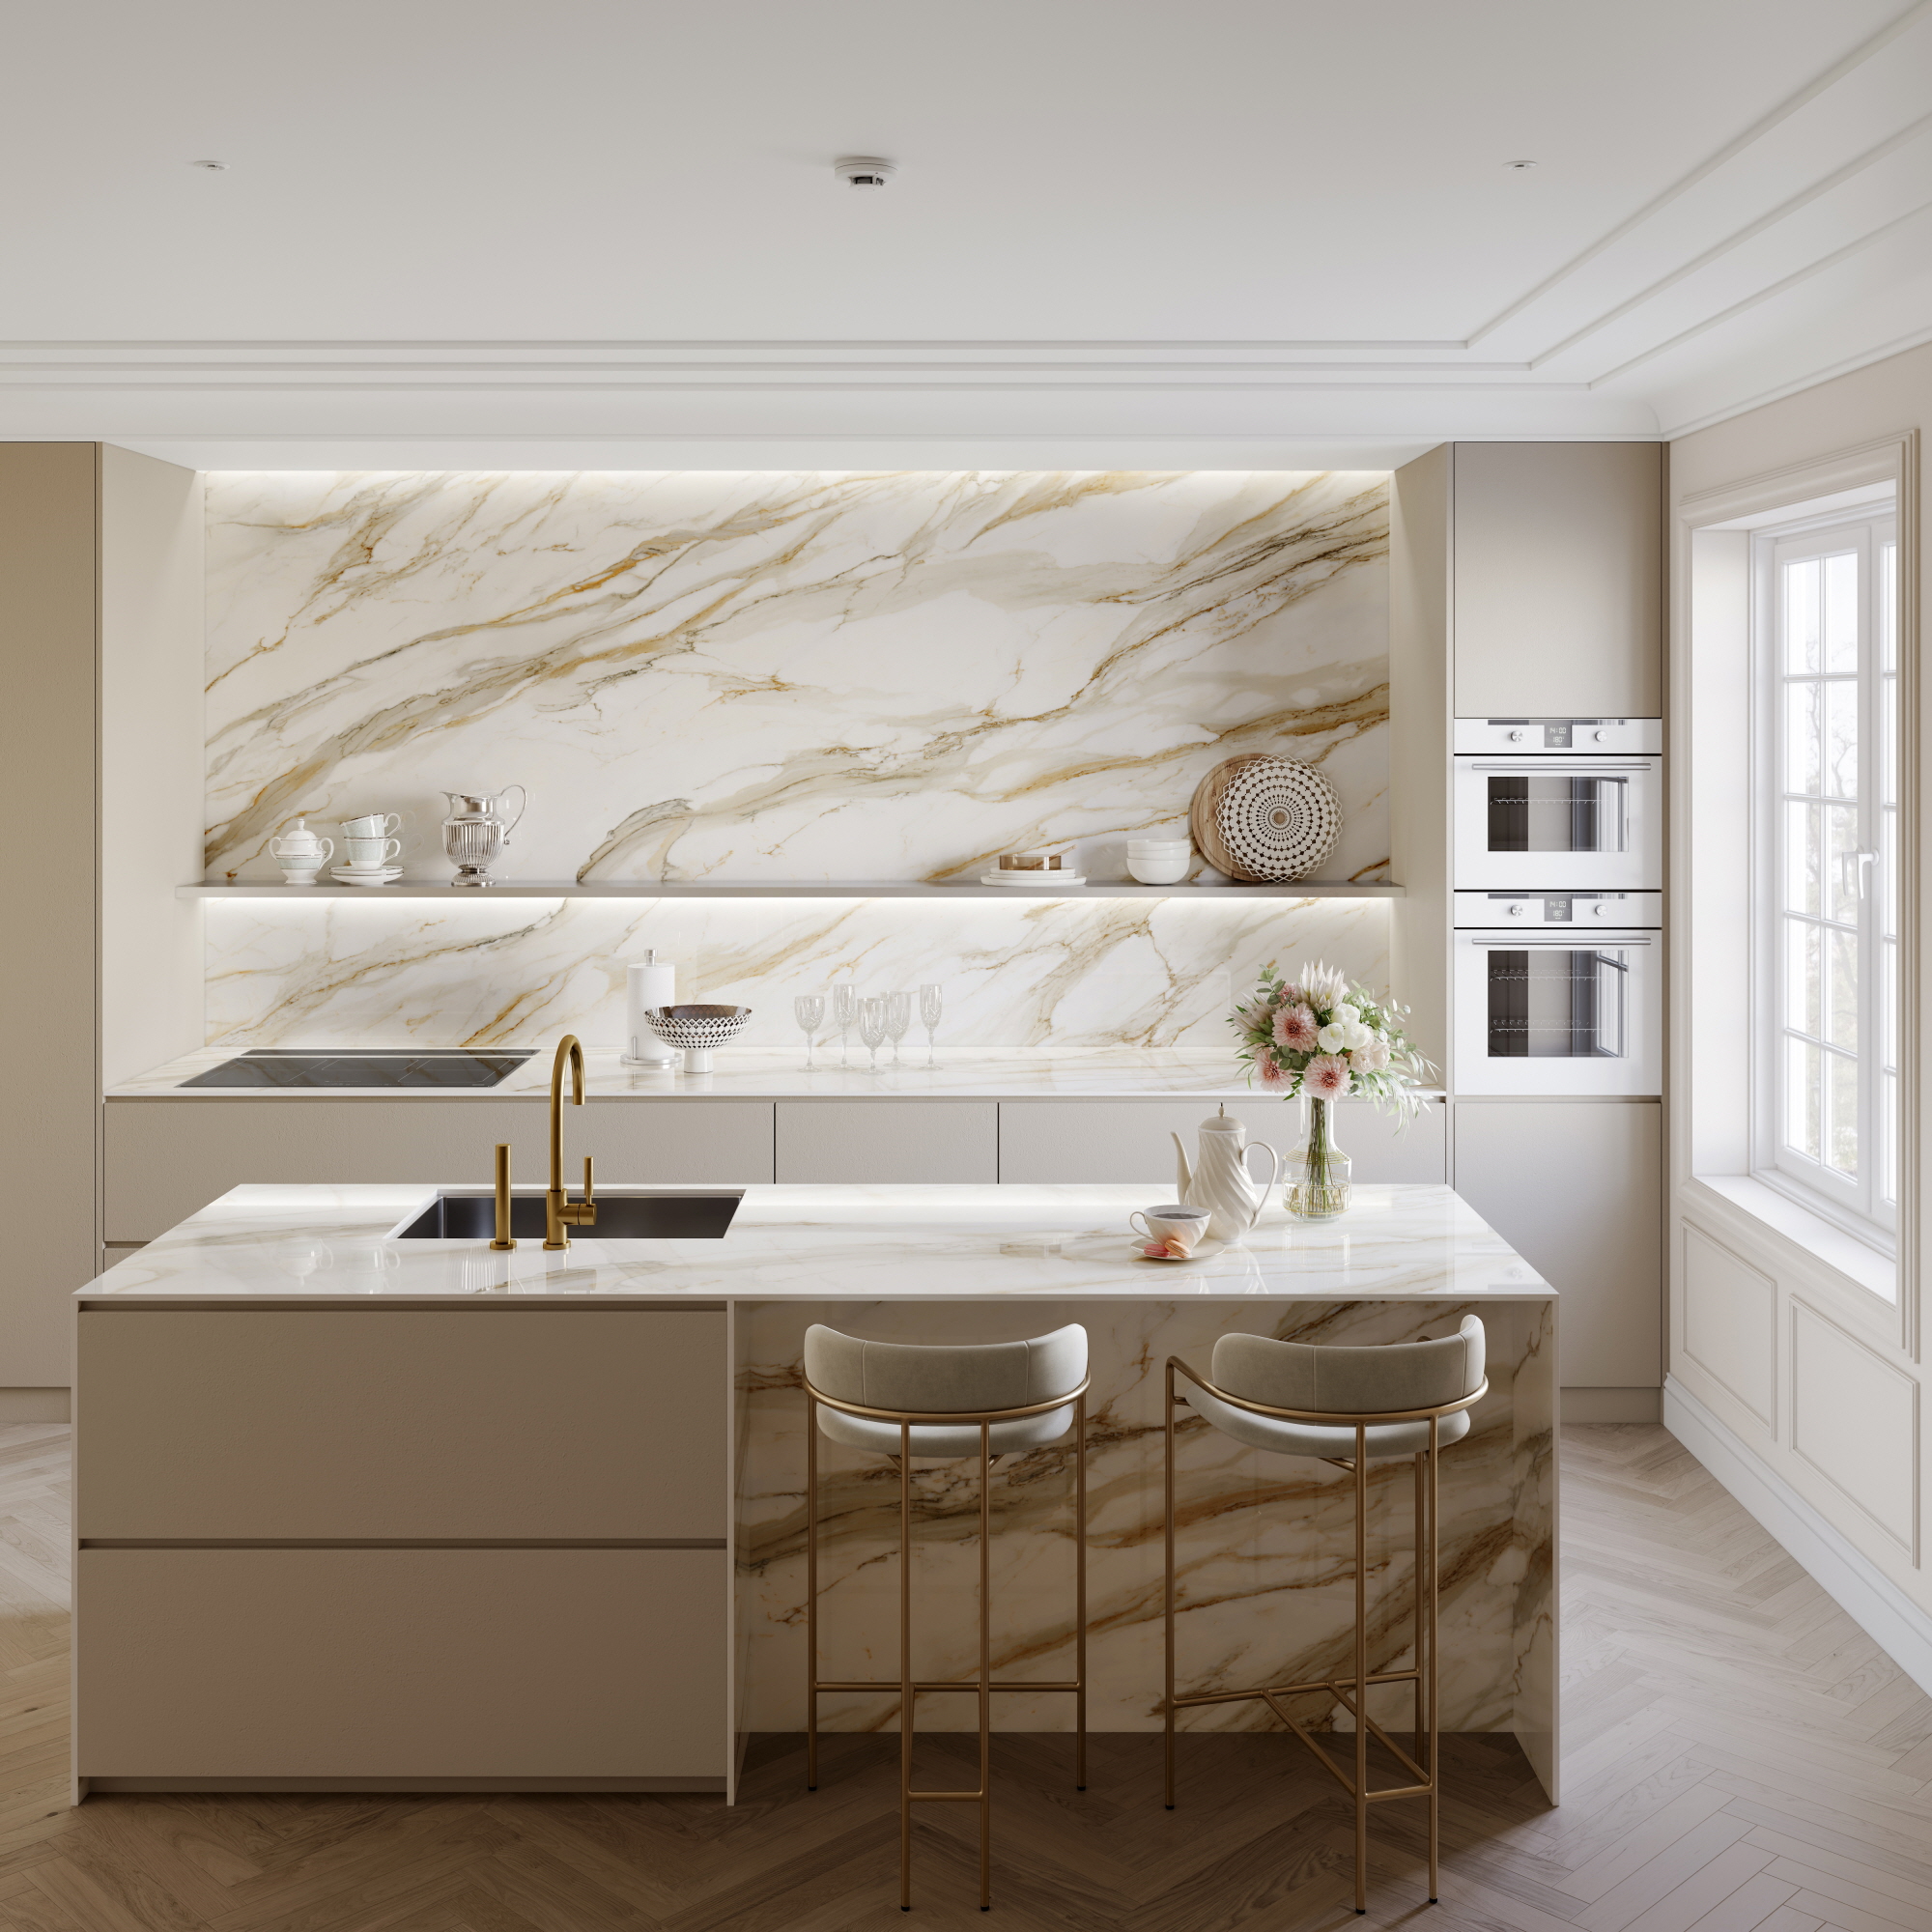 LX Hausys TERACANTO – Make a statement with Calacatta Extreme’s expressive gold and gray veining.